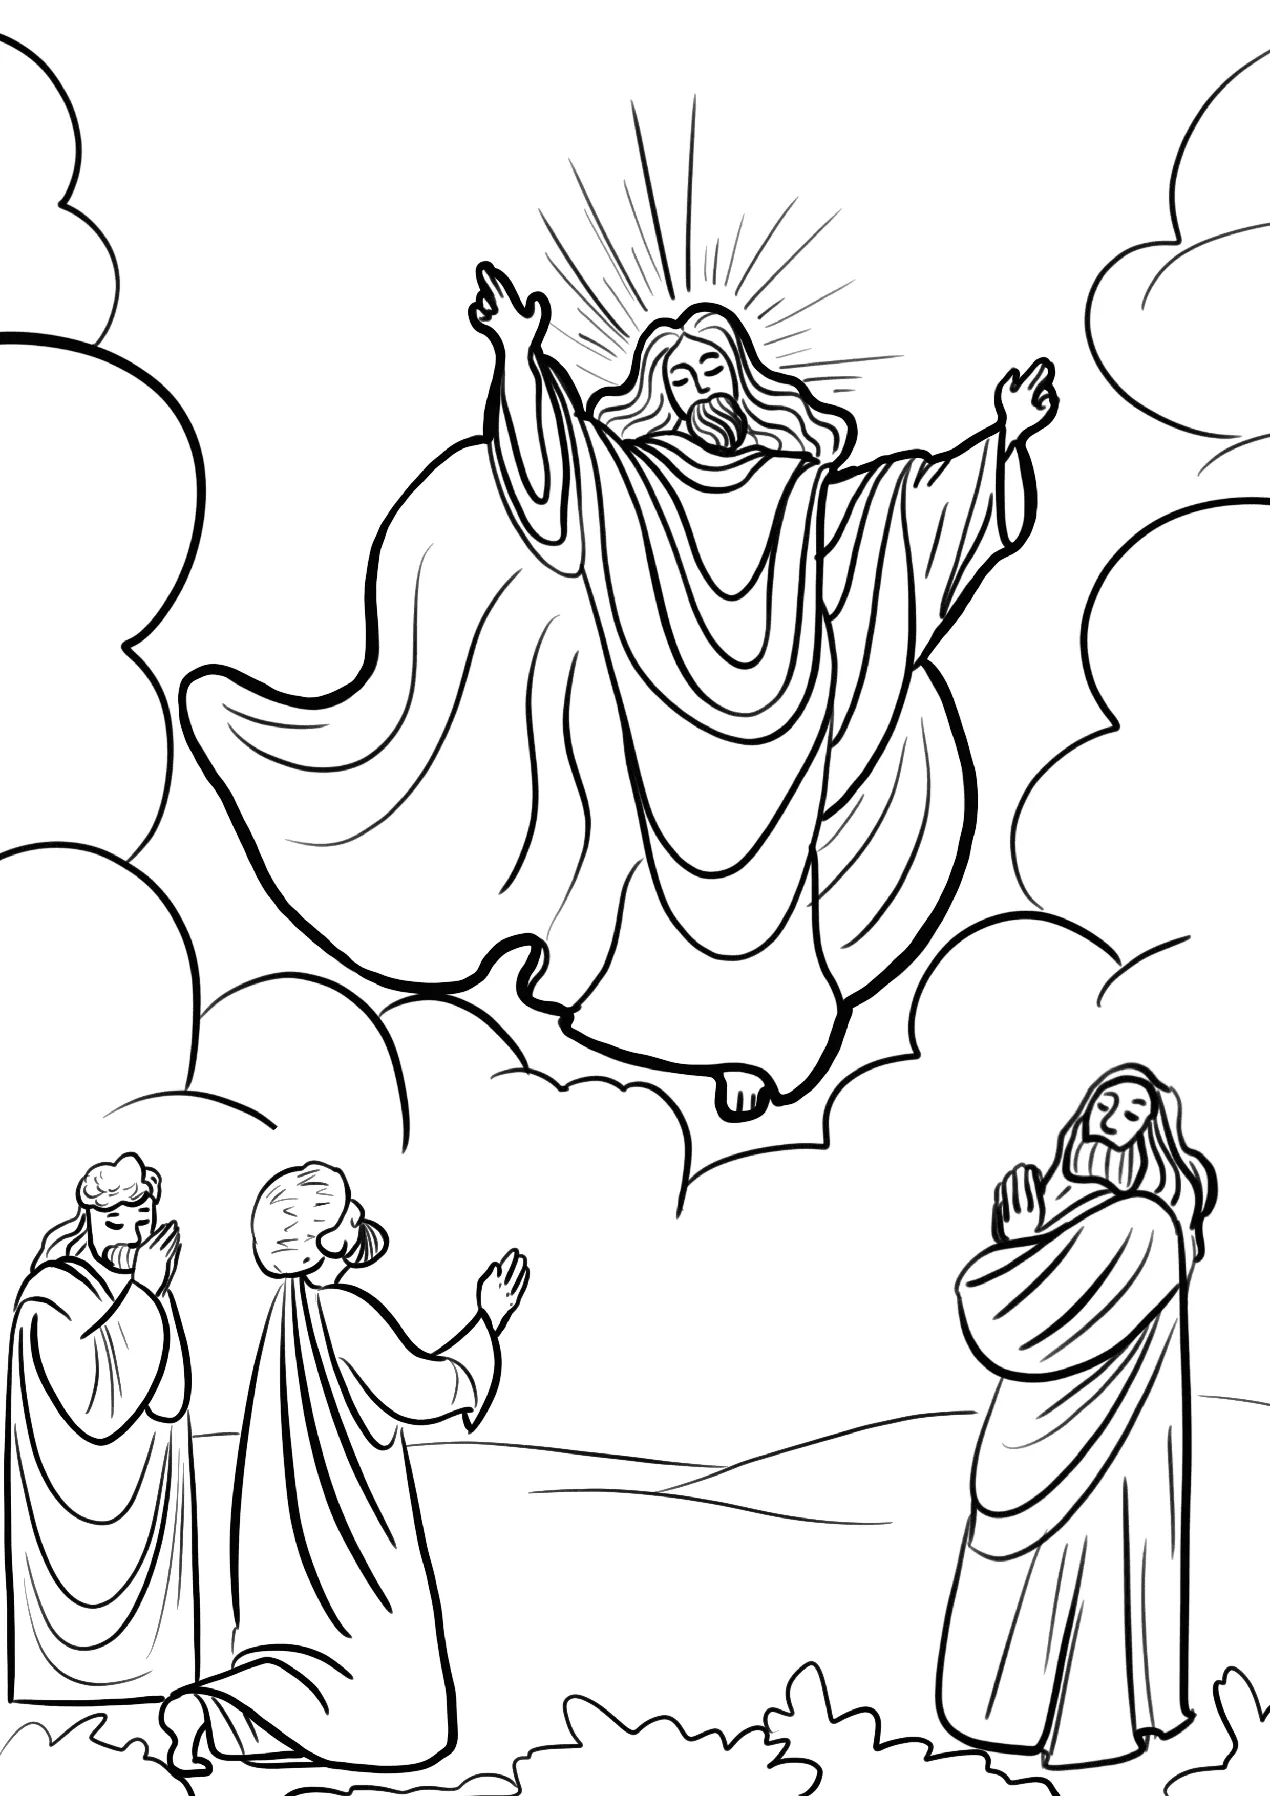 Ascension Of Jesus Coloring Pages   Free Bible Coloring Pages   Kidadl